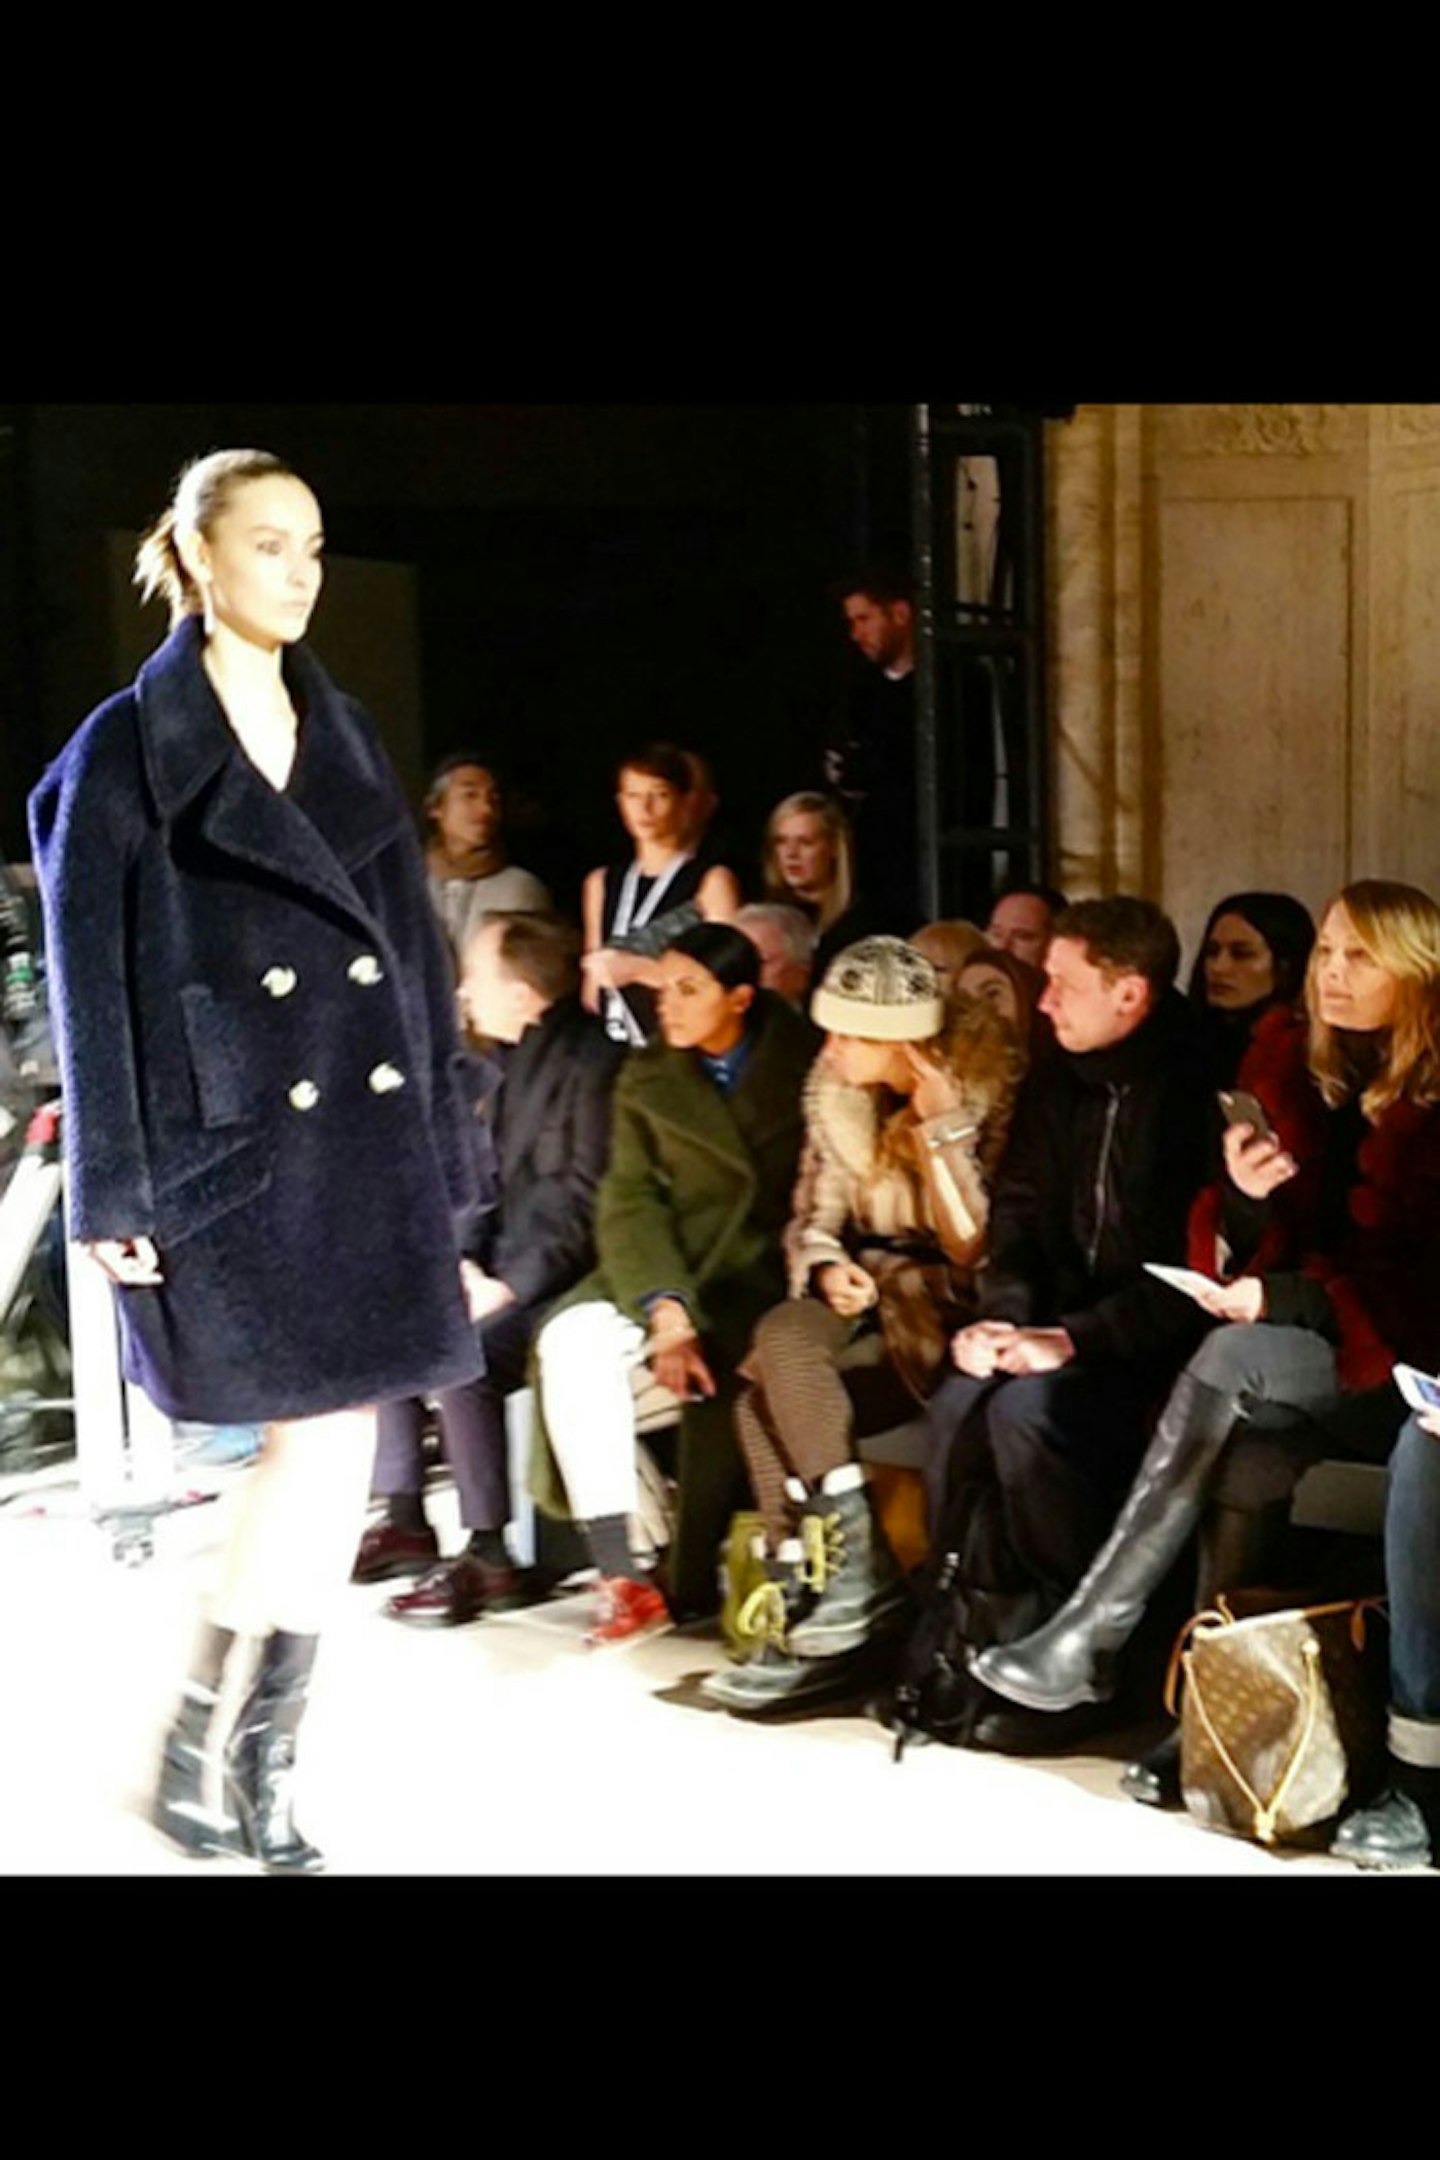 Live from Victoria Beckham's Show >>